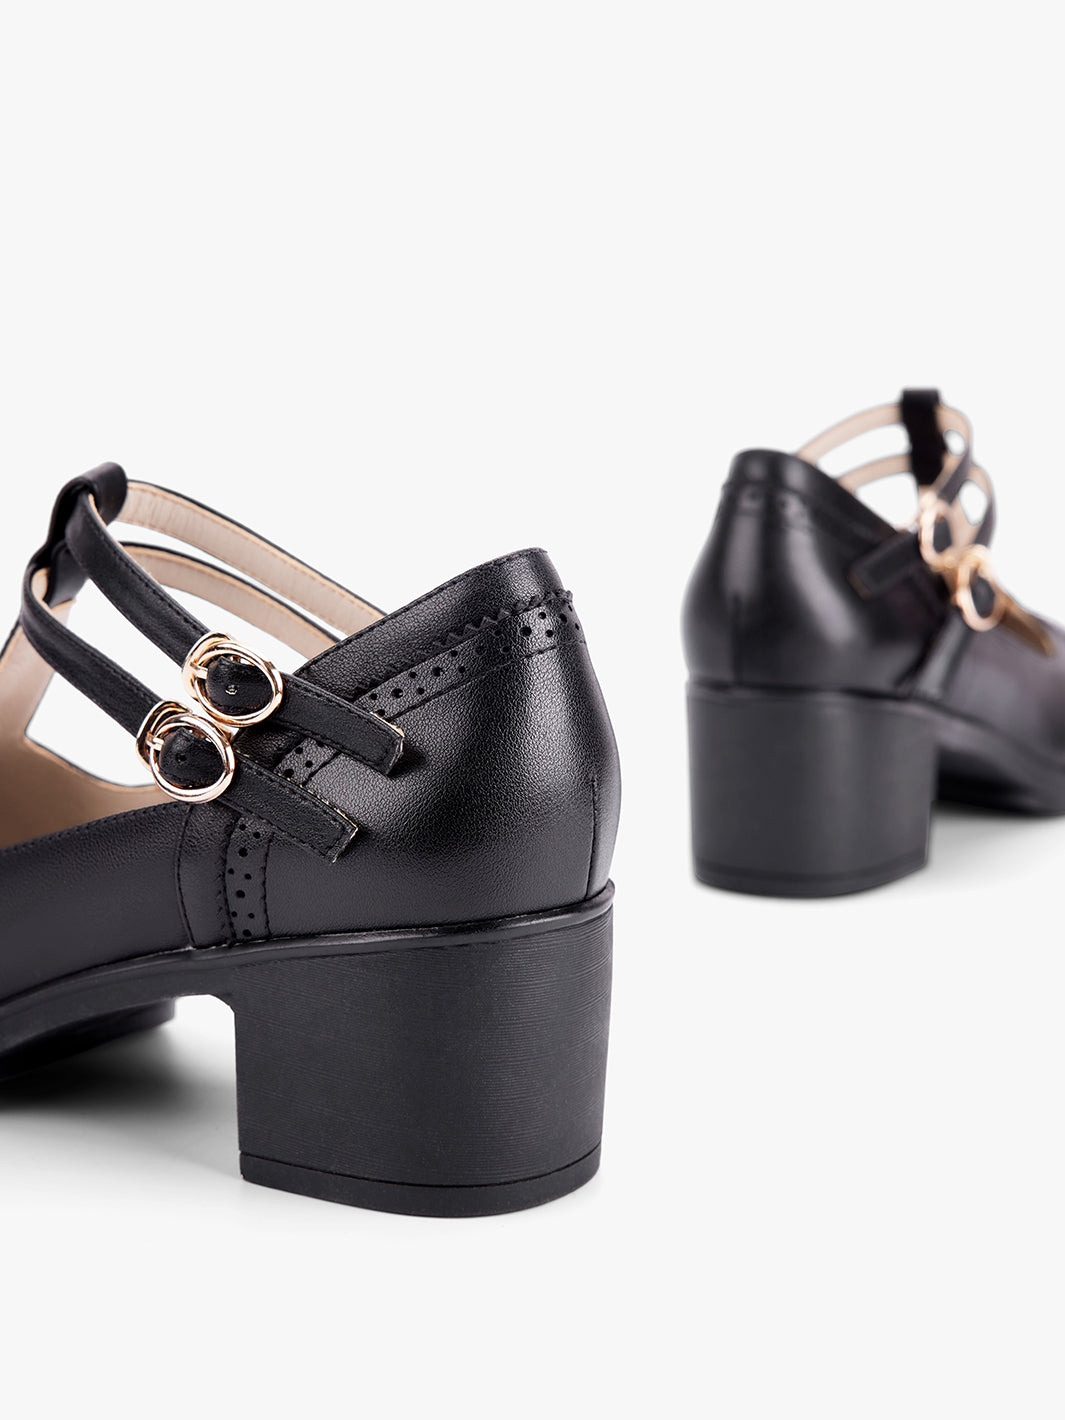 Classic T-Strap Leather Shoes - Handmade, Vegan Leather, 5 cm Heel,  Brown/Black. Perfect for all occasions.– Ecosusi